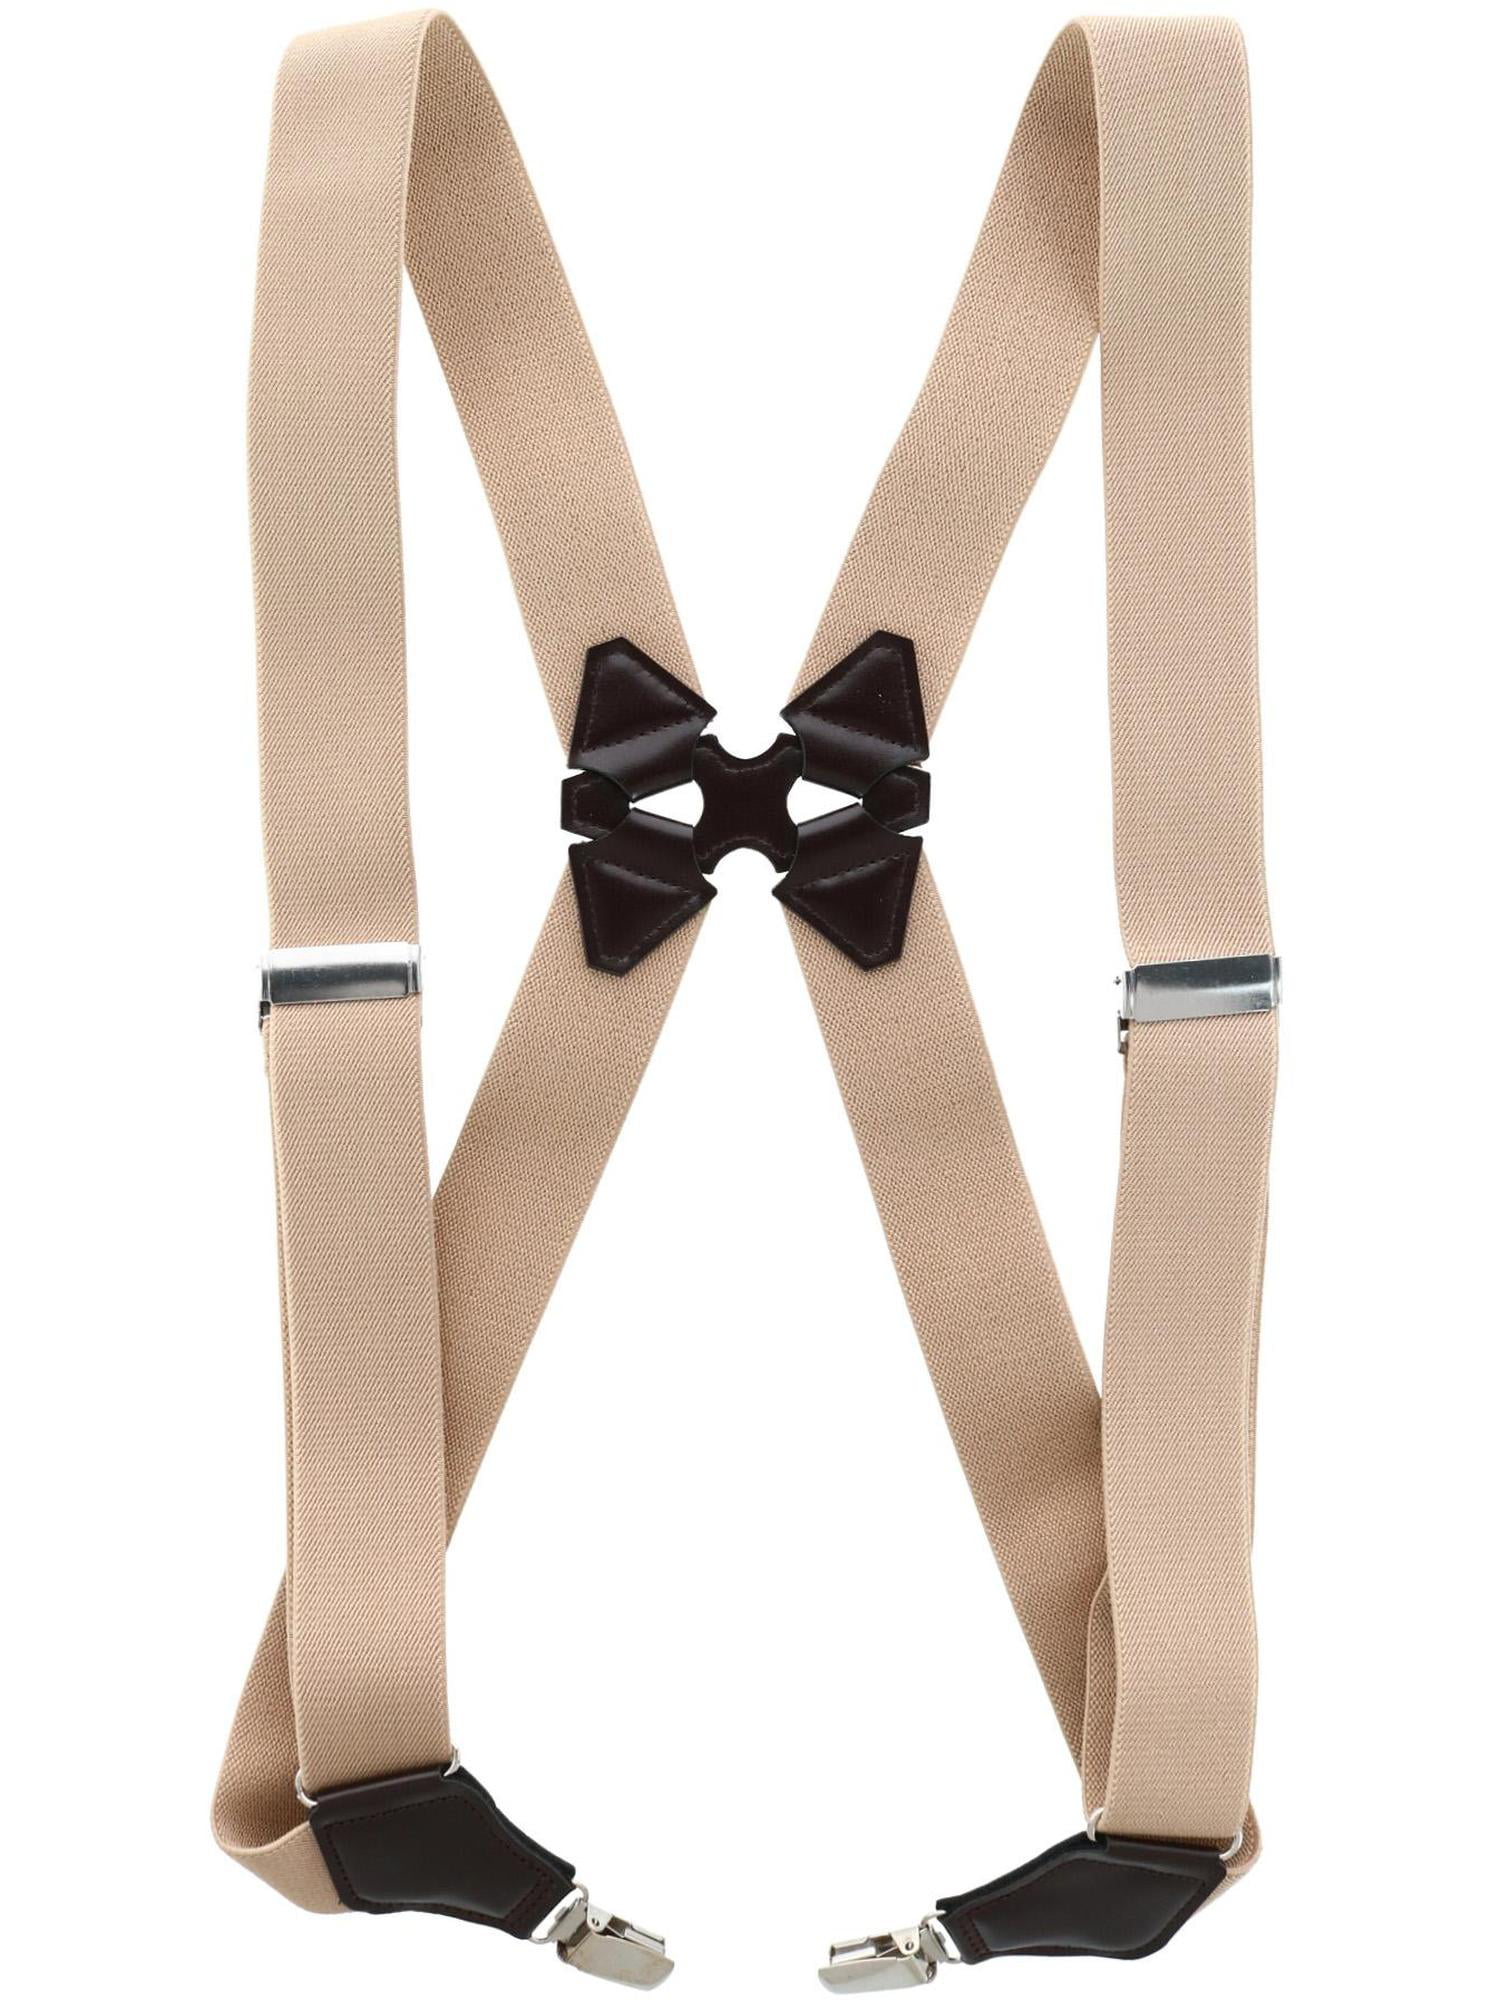 Canvas Belt Mens No Slip Clip X Back Suspenders with Leather Trim-Available Color : Black, Size : Free Size